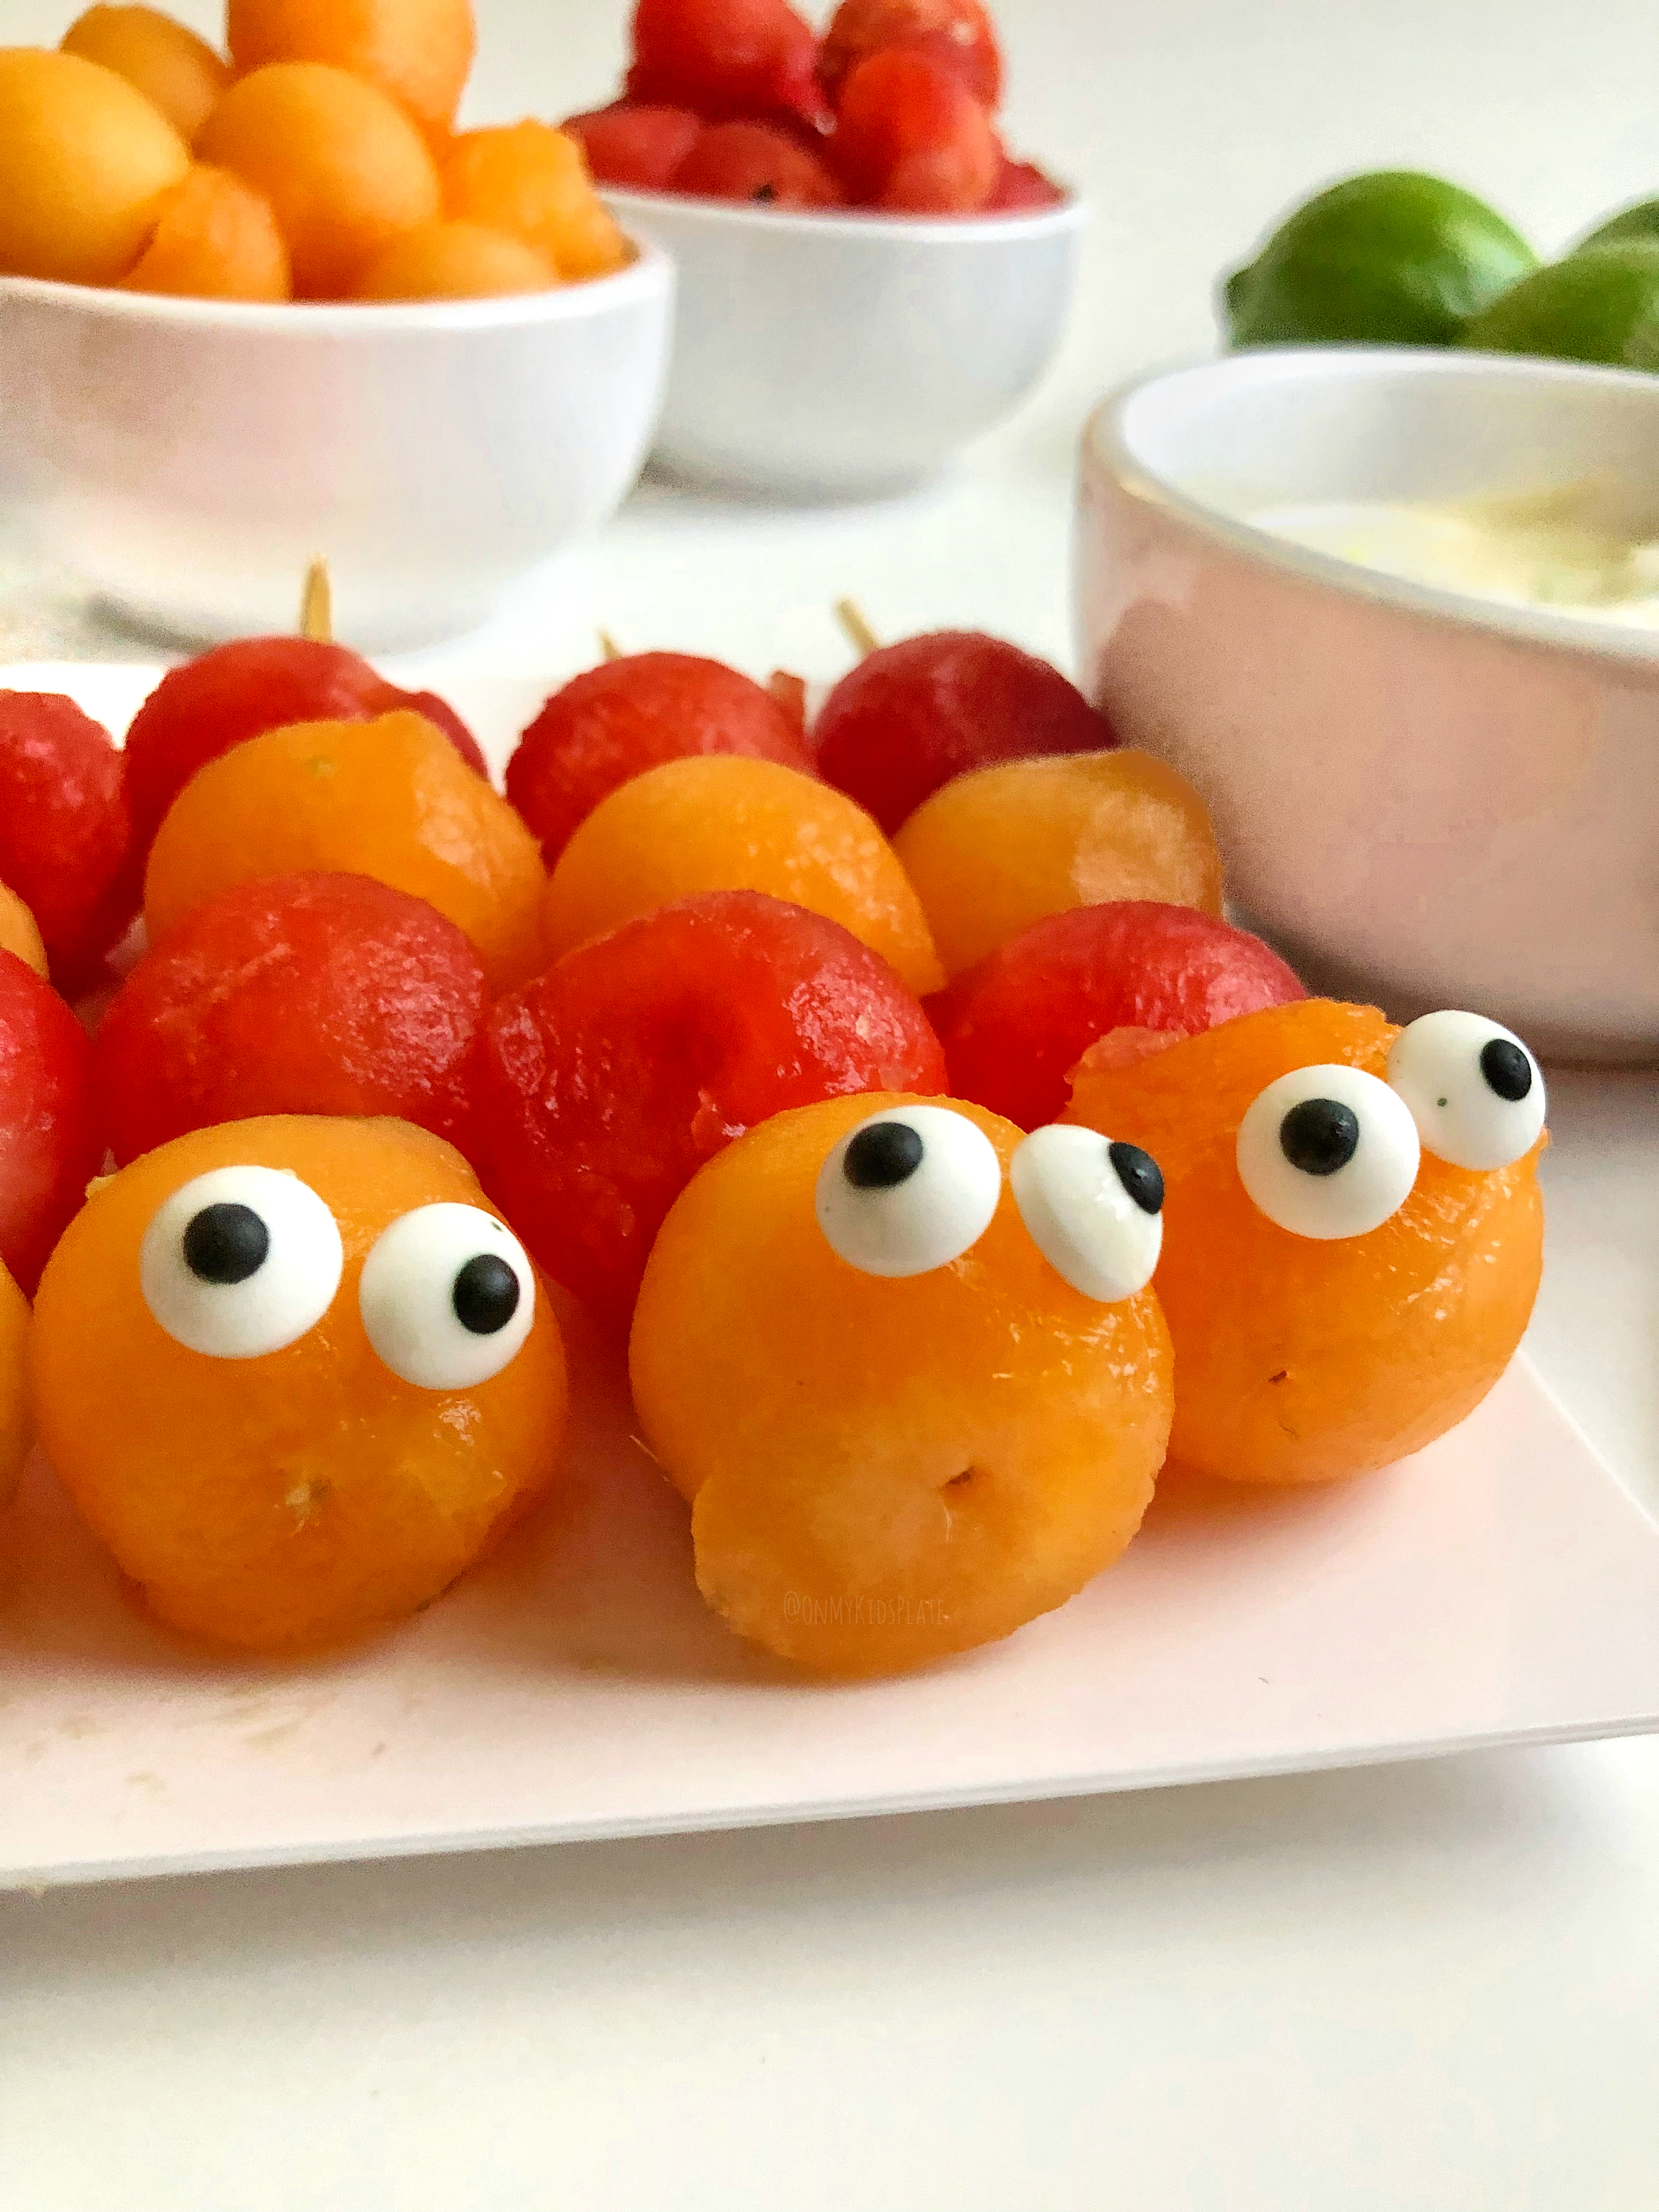 Cute pre-made Caterpillar Fruit Kebabs, ready for dipping 